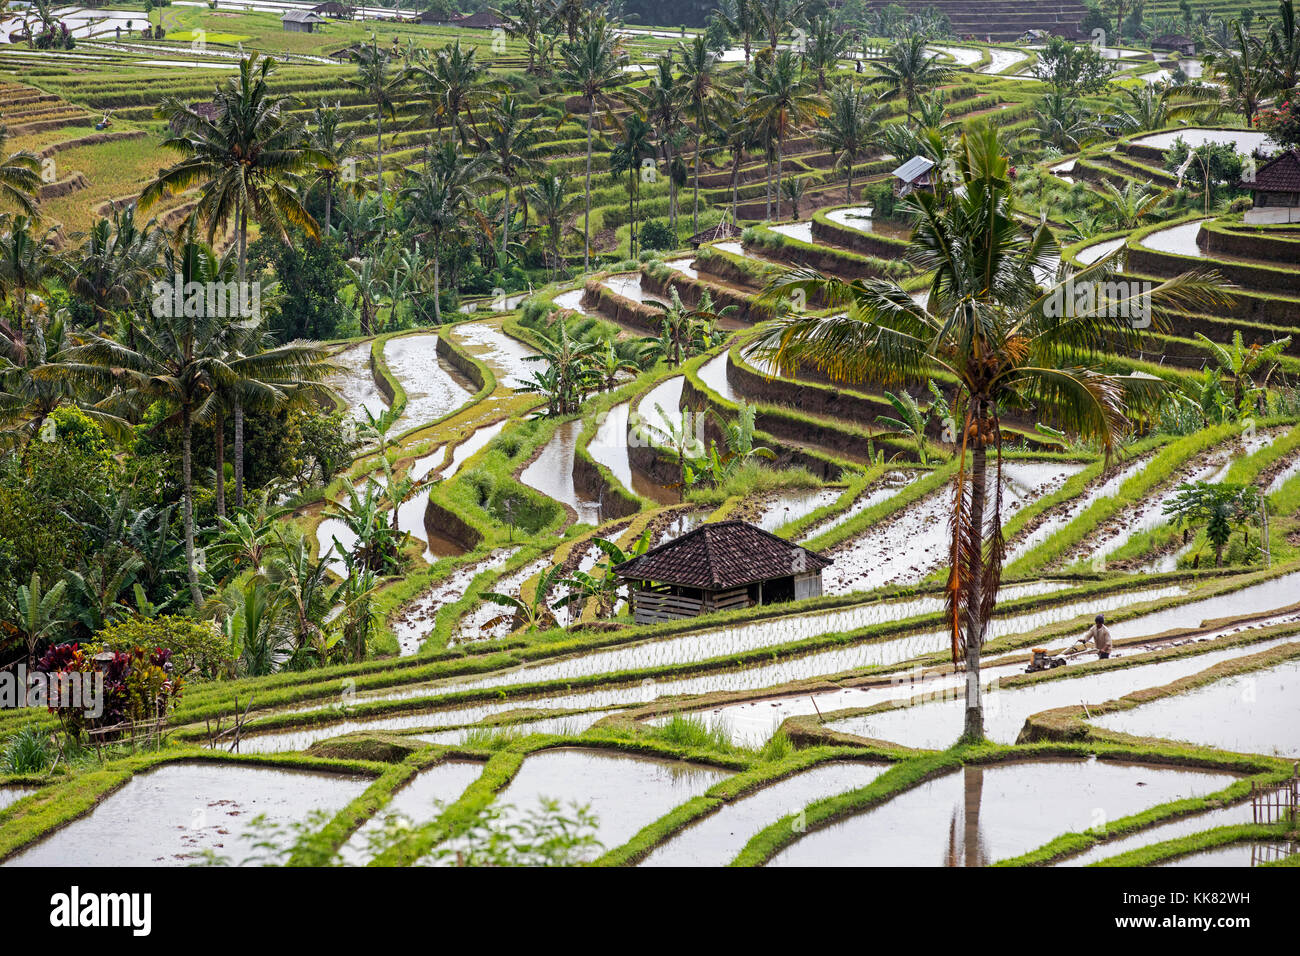 Jatiluwih terraced paddy fields, rice terraces in the highlands of West Bali, Indonesia Stock Photo